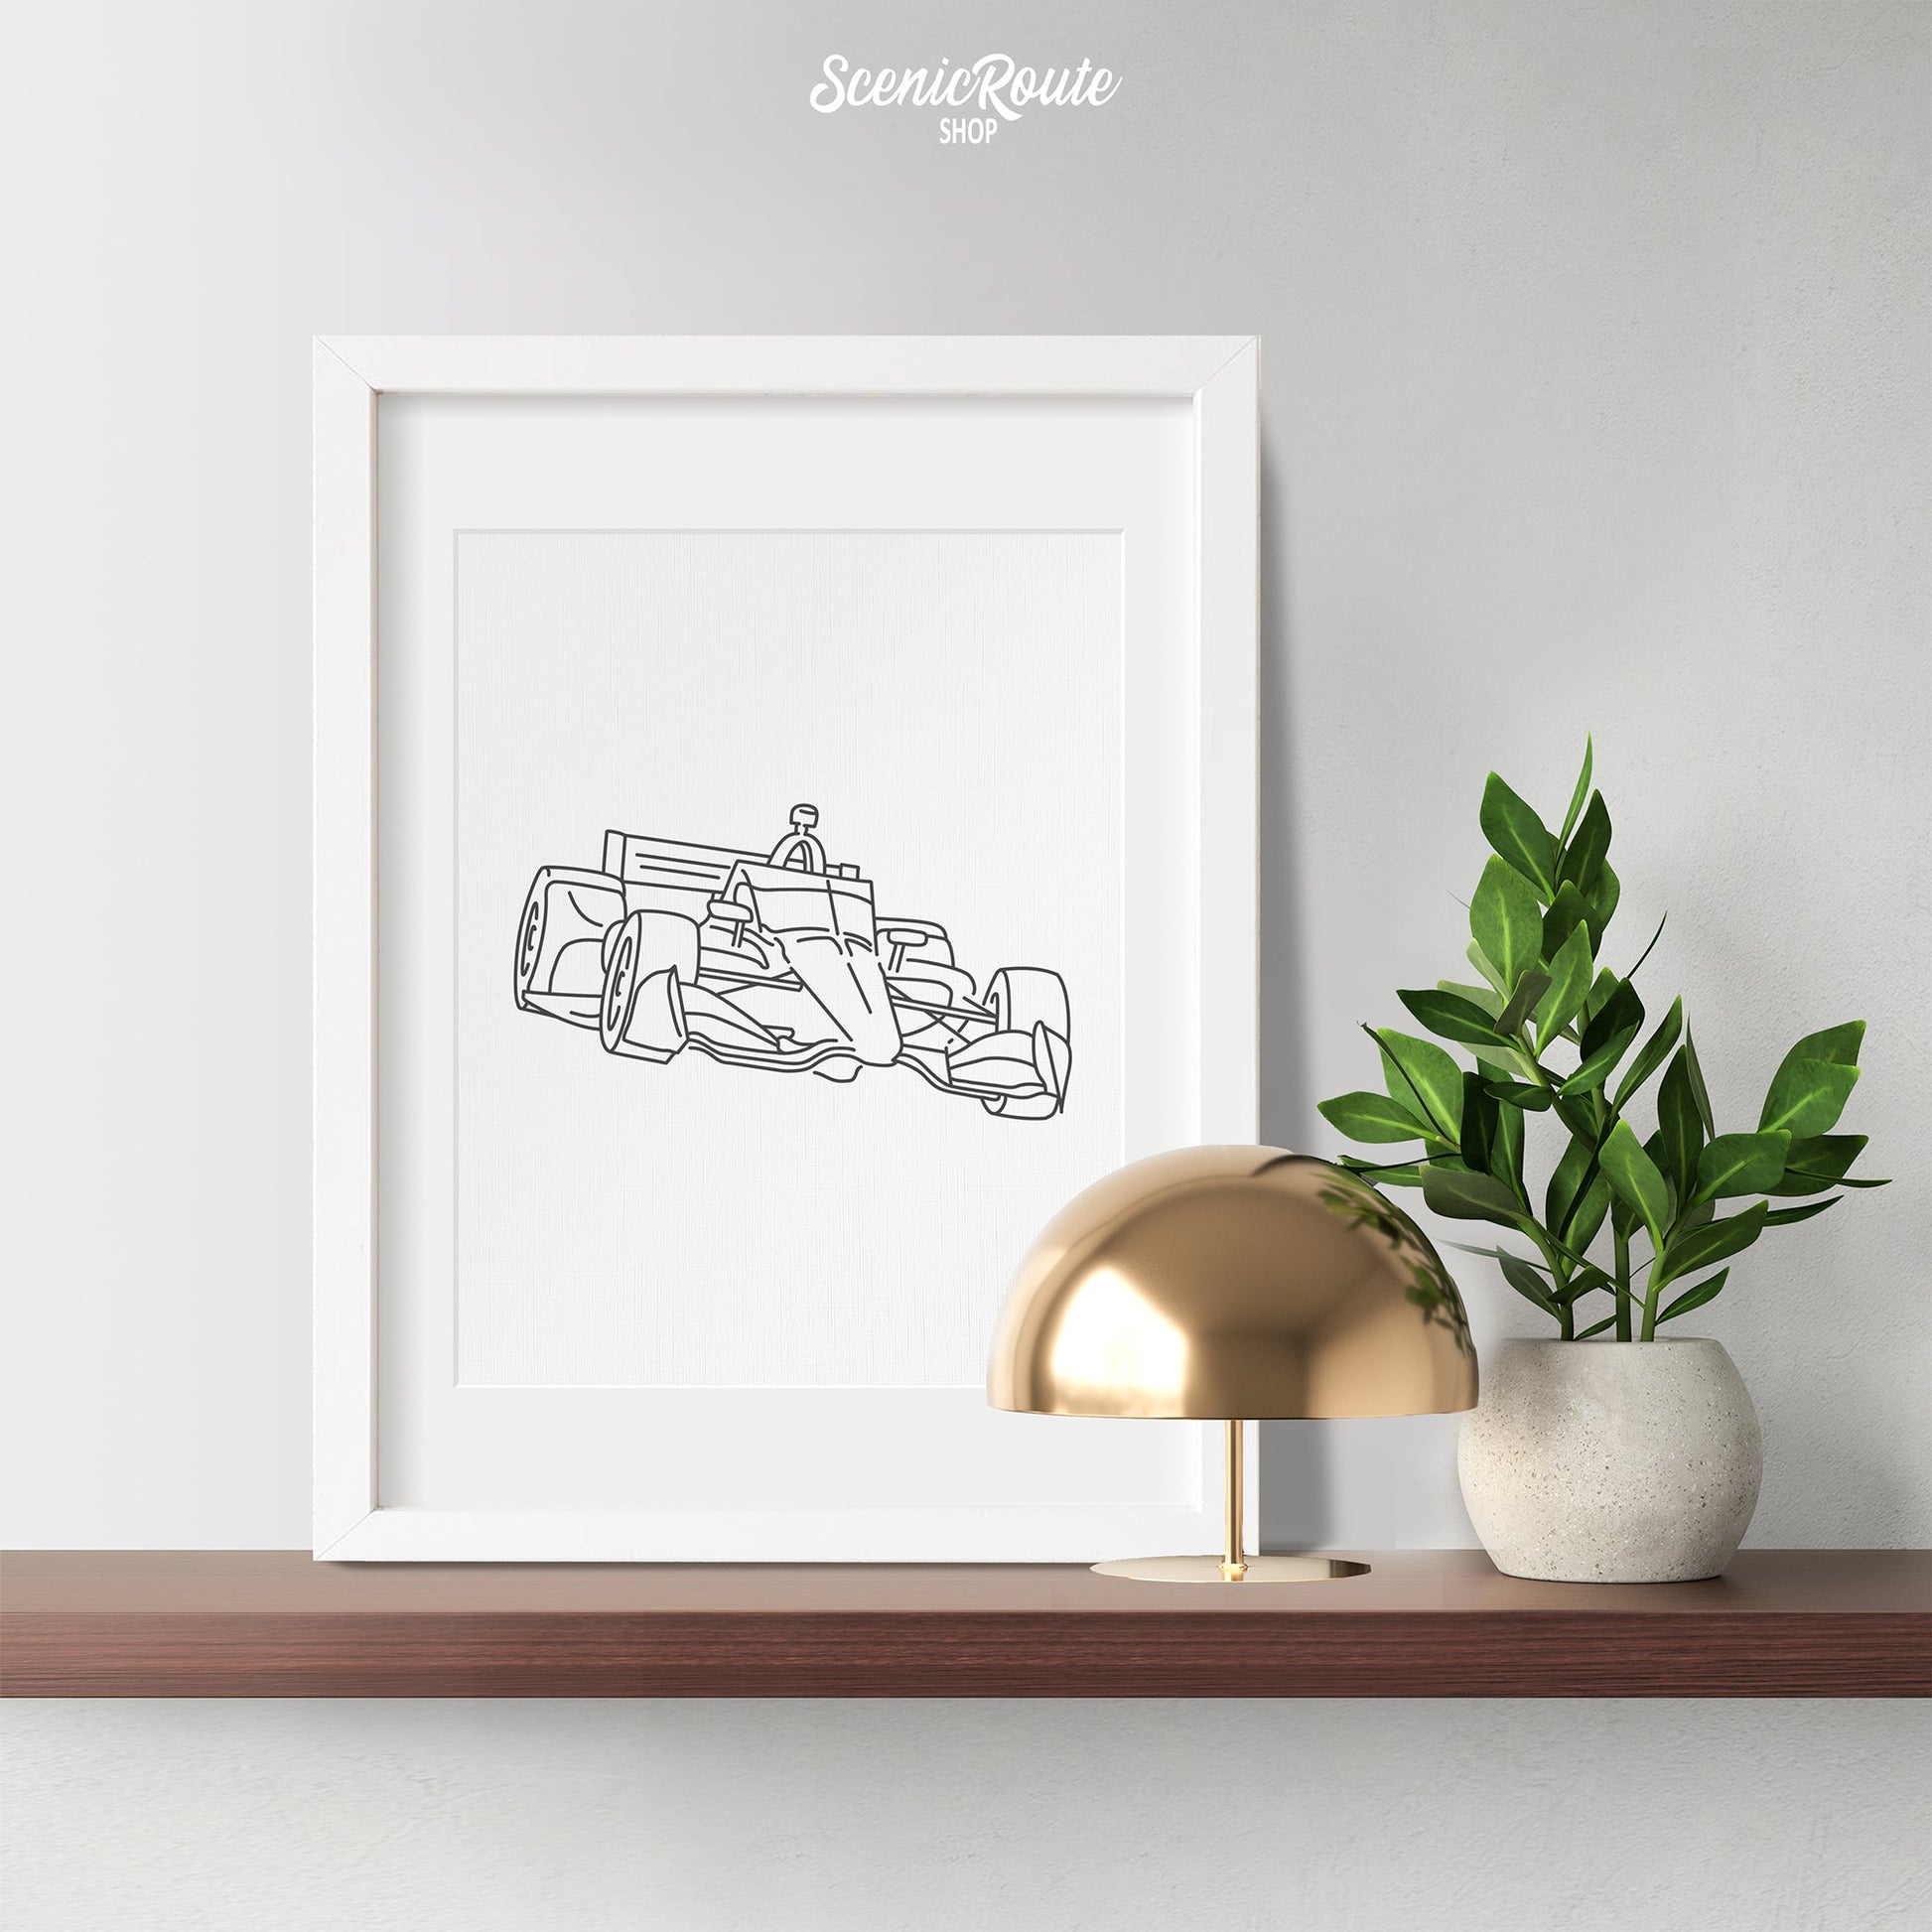 A framed line art drawing of an Indy Car on a wood shelf with a plant and lamp